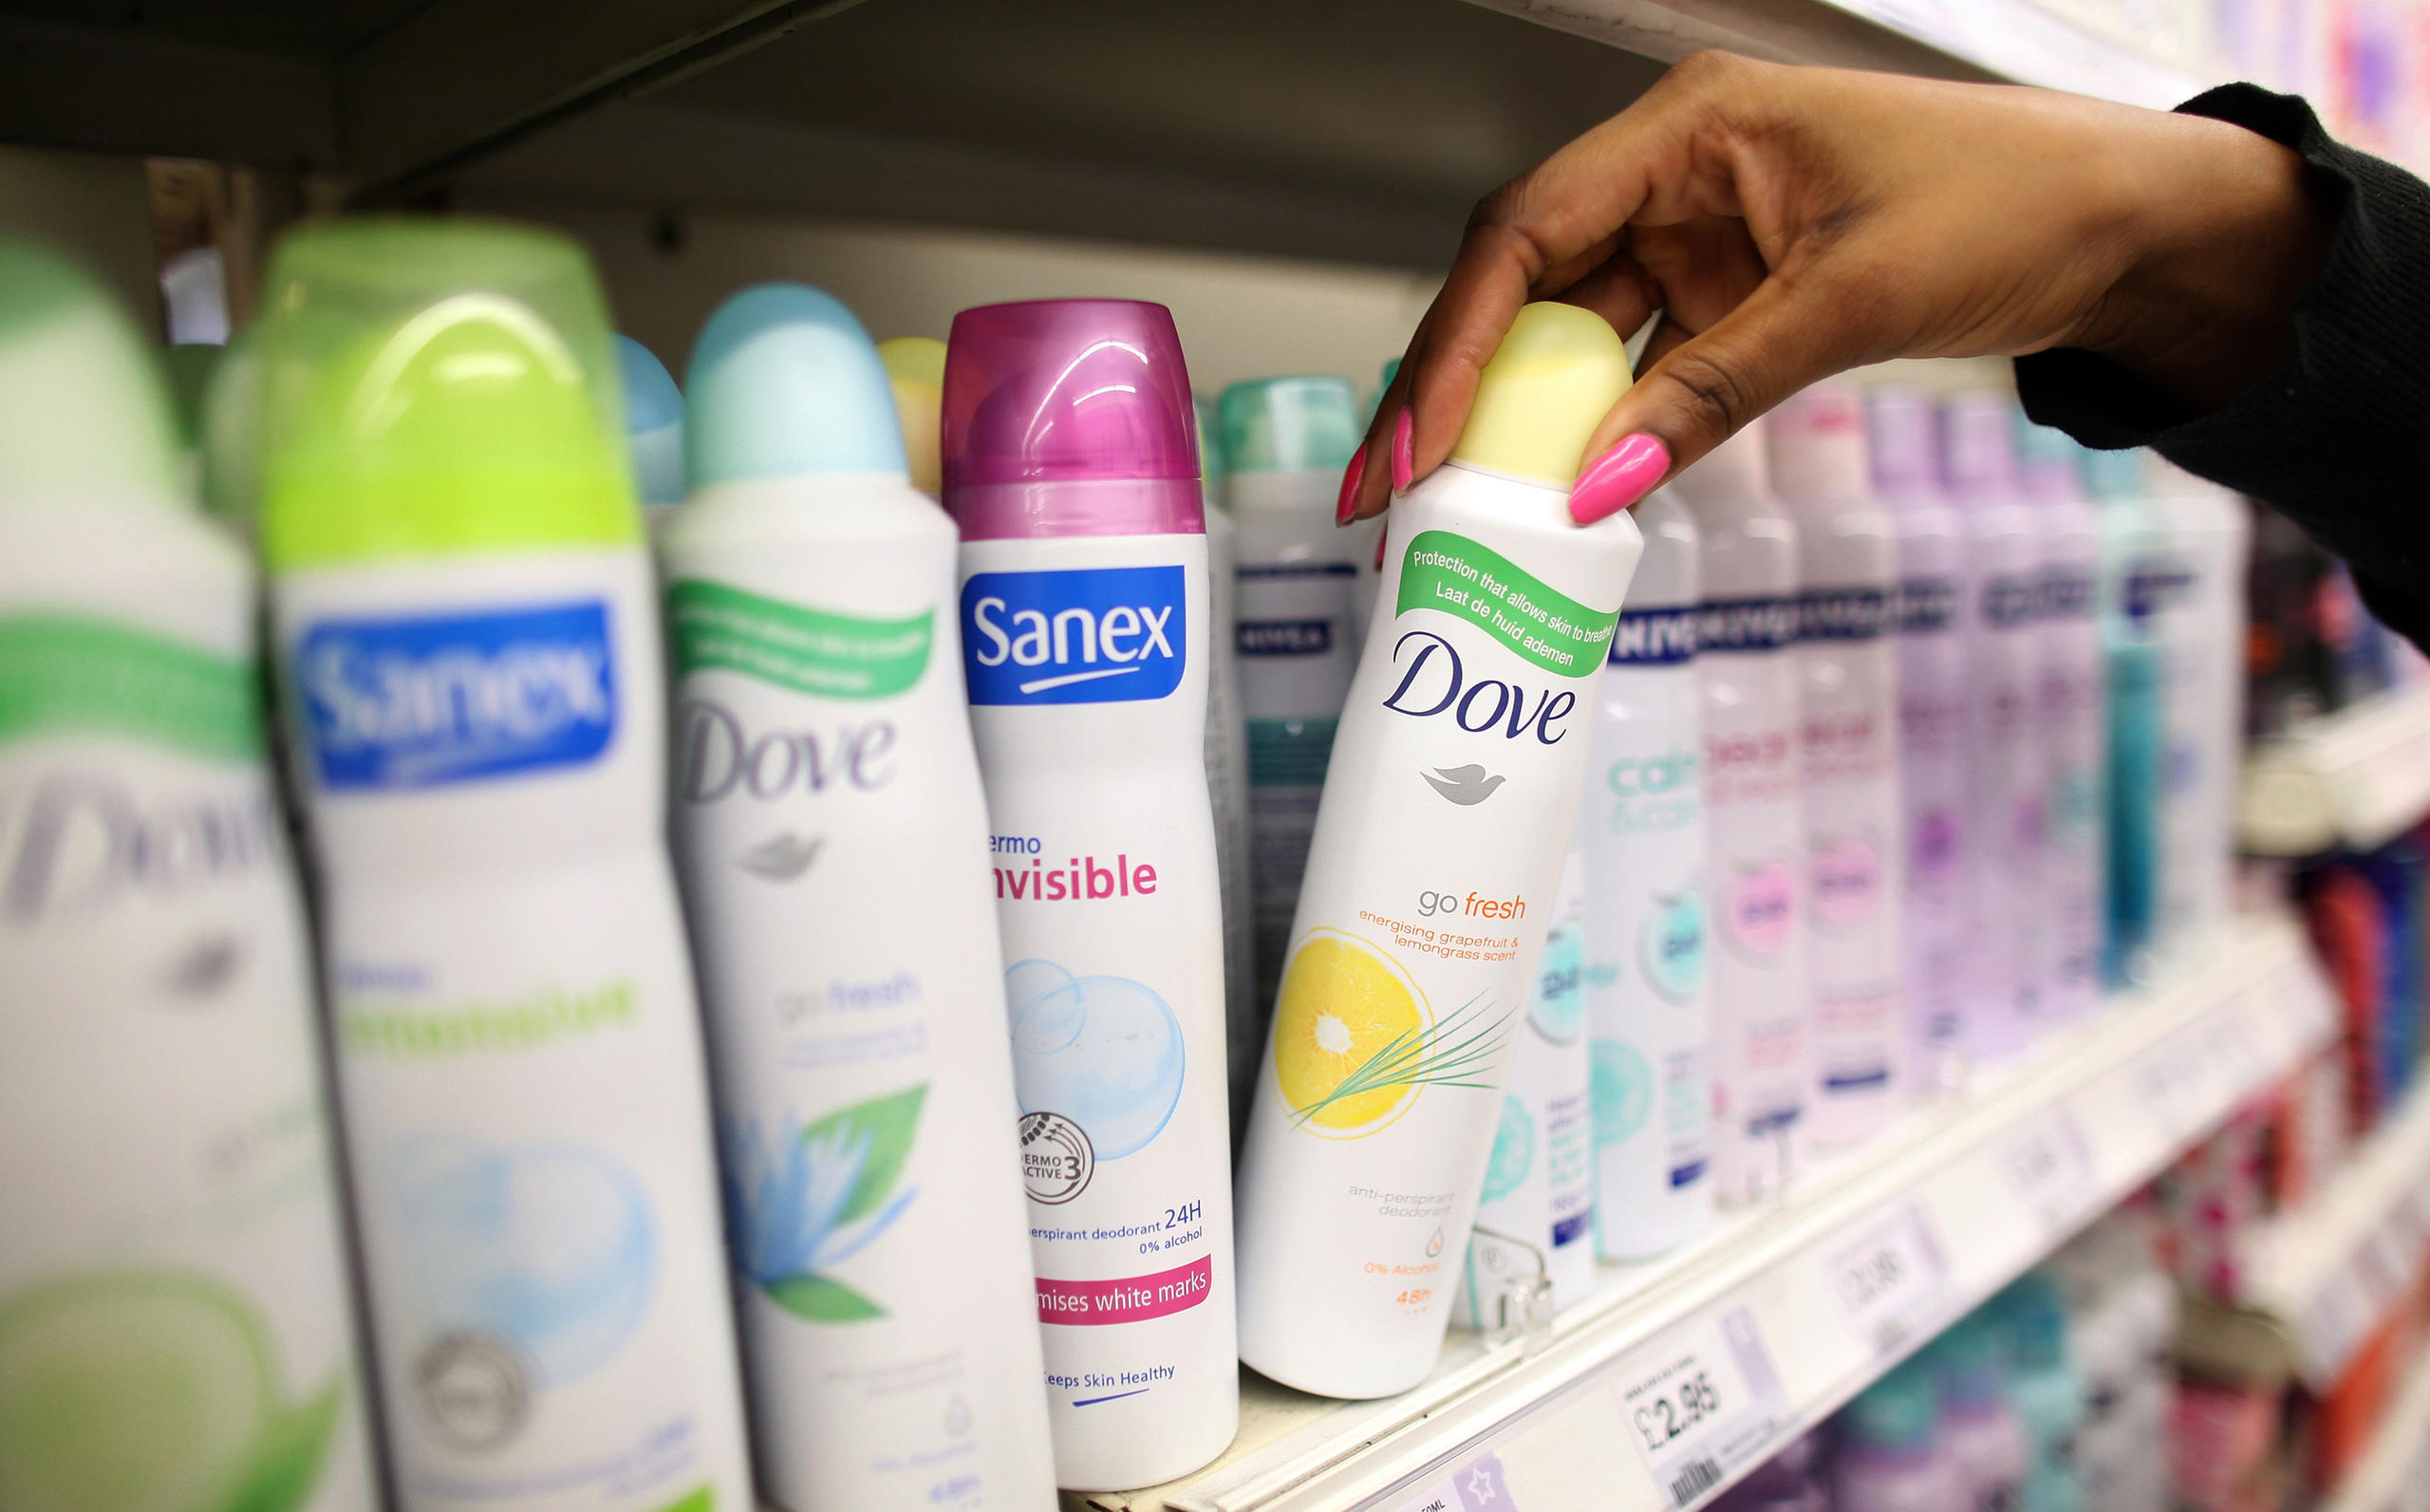 Cans of Dove deodorant sit with cans of Sanex deodorant at a supermarket in London, U.K., on Nov. 17, 2010